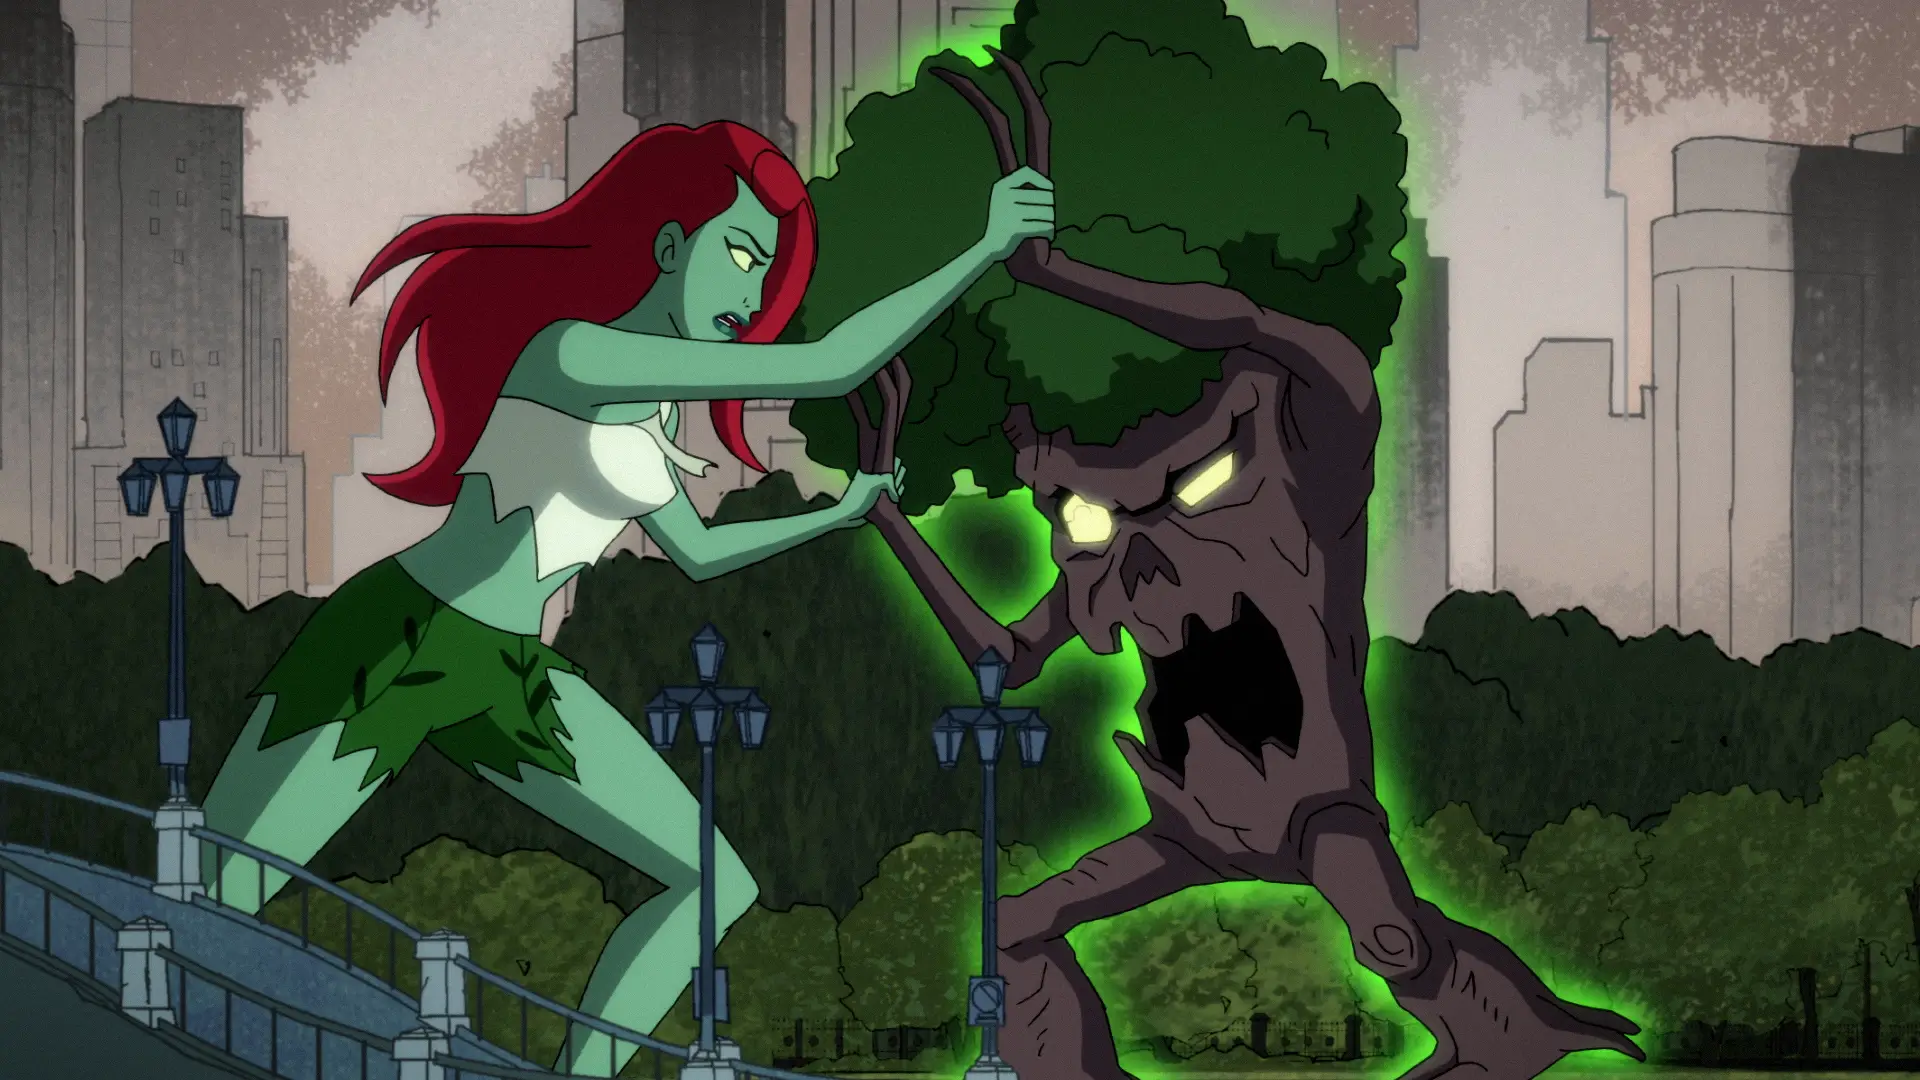 Poison Ivy fights tree